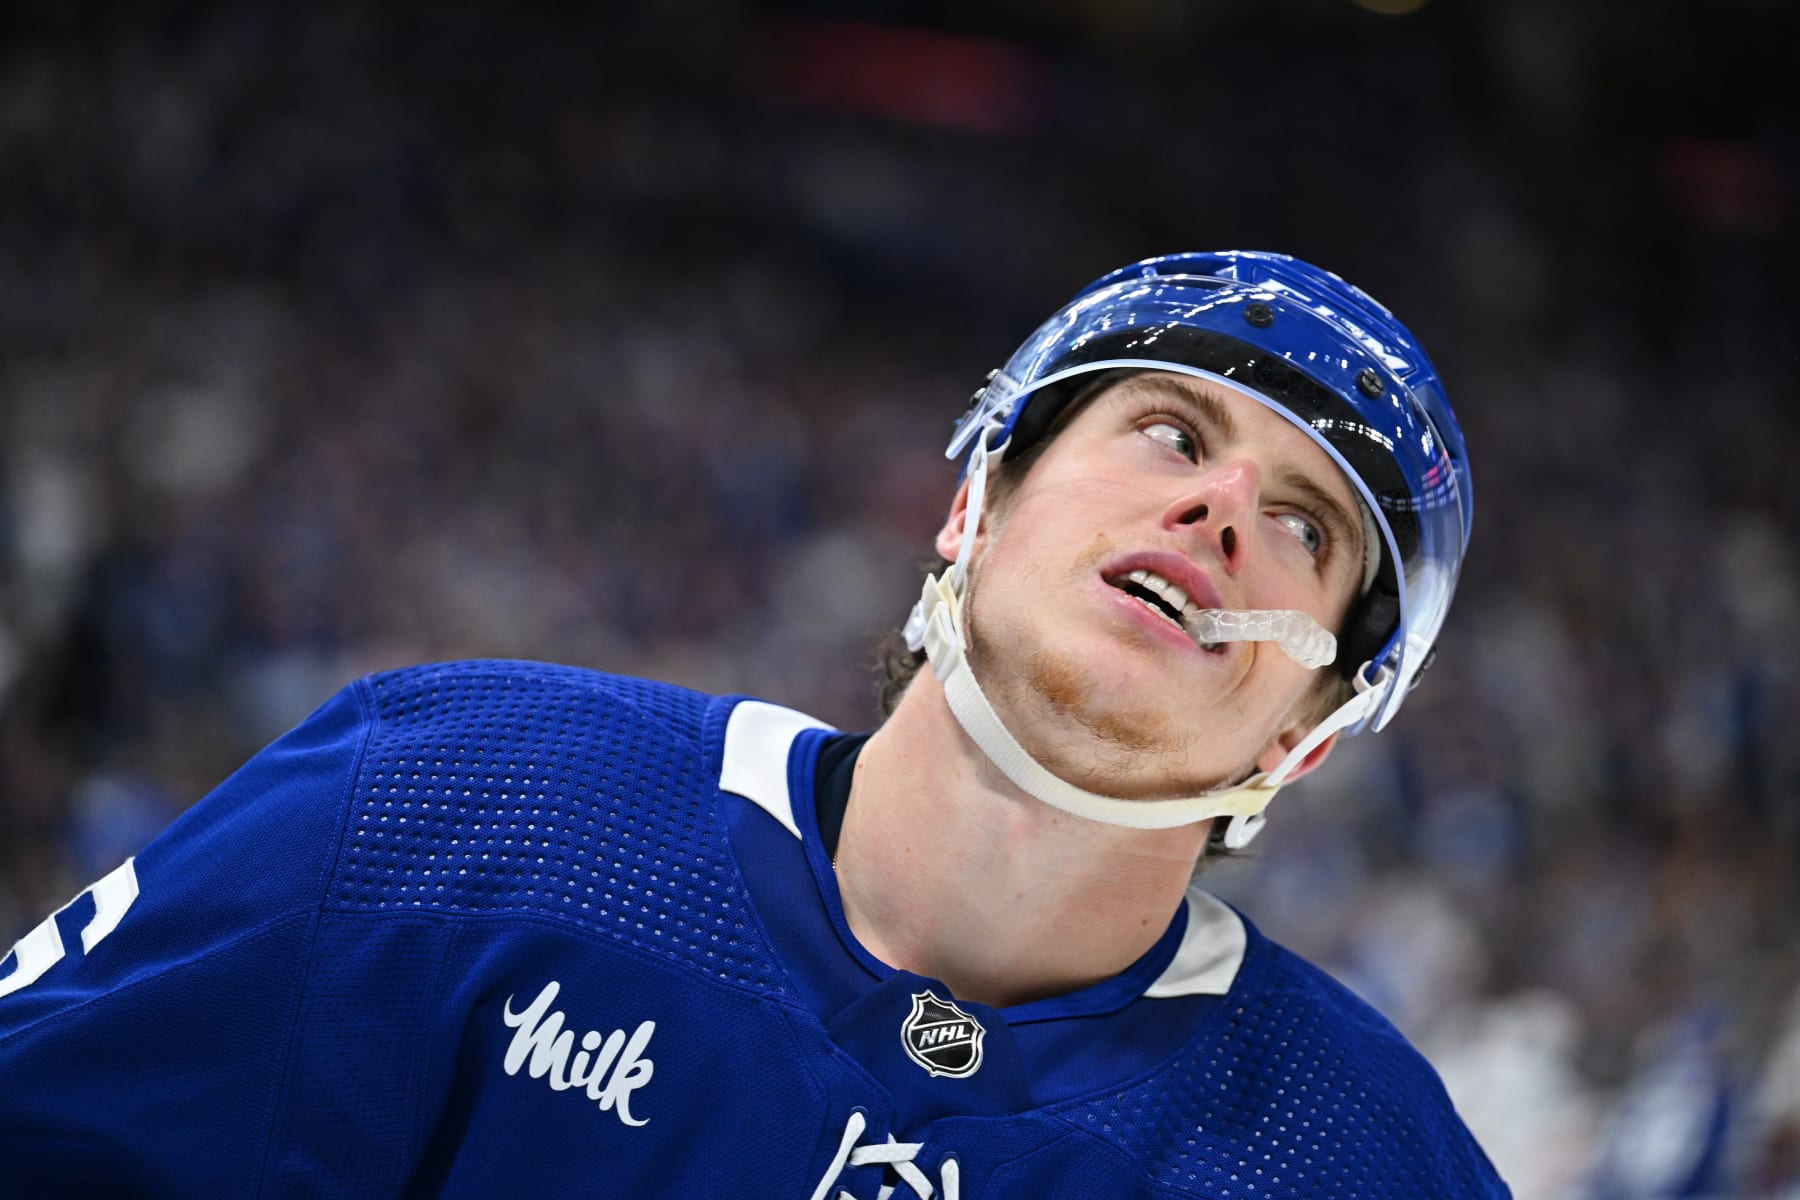 Leafs' top draft pick Mitch Marner talks conservative financial strategy